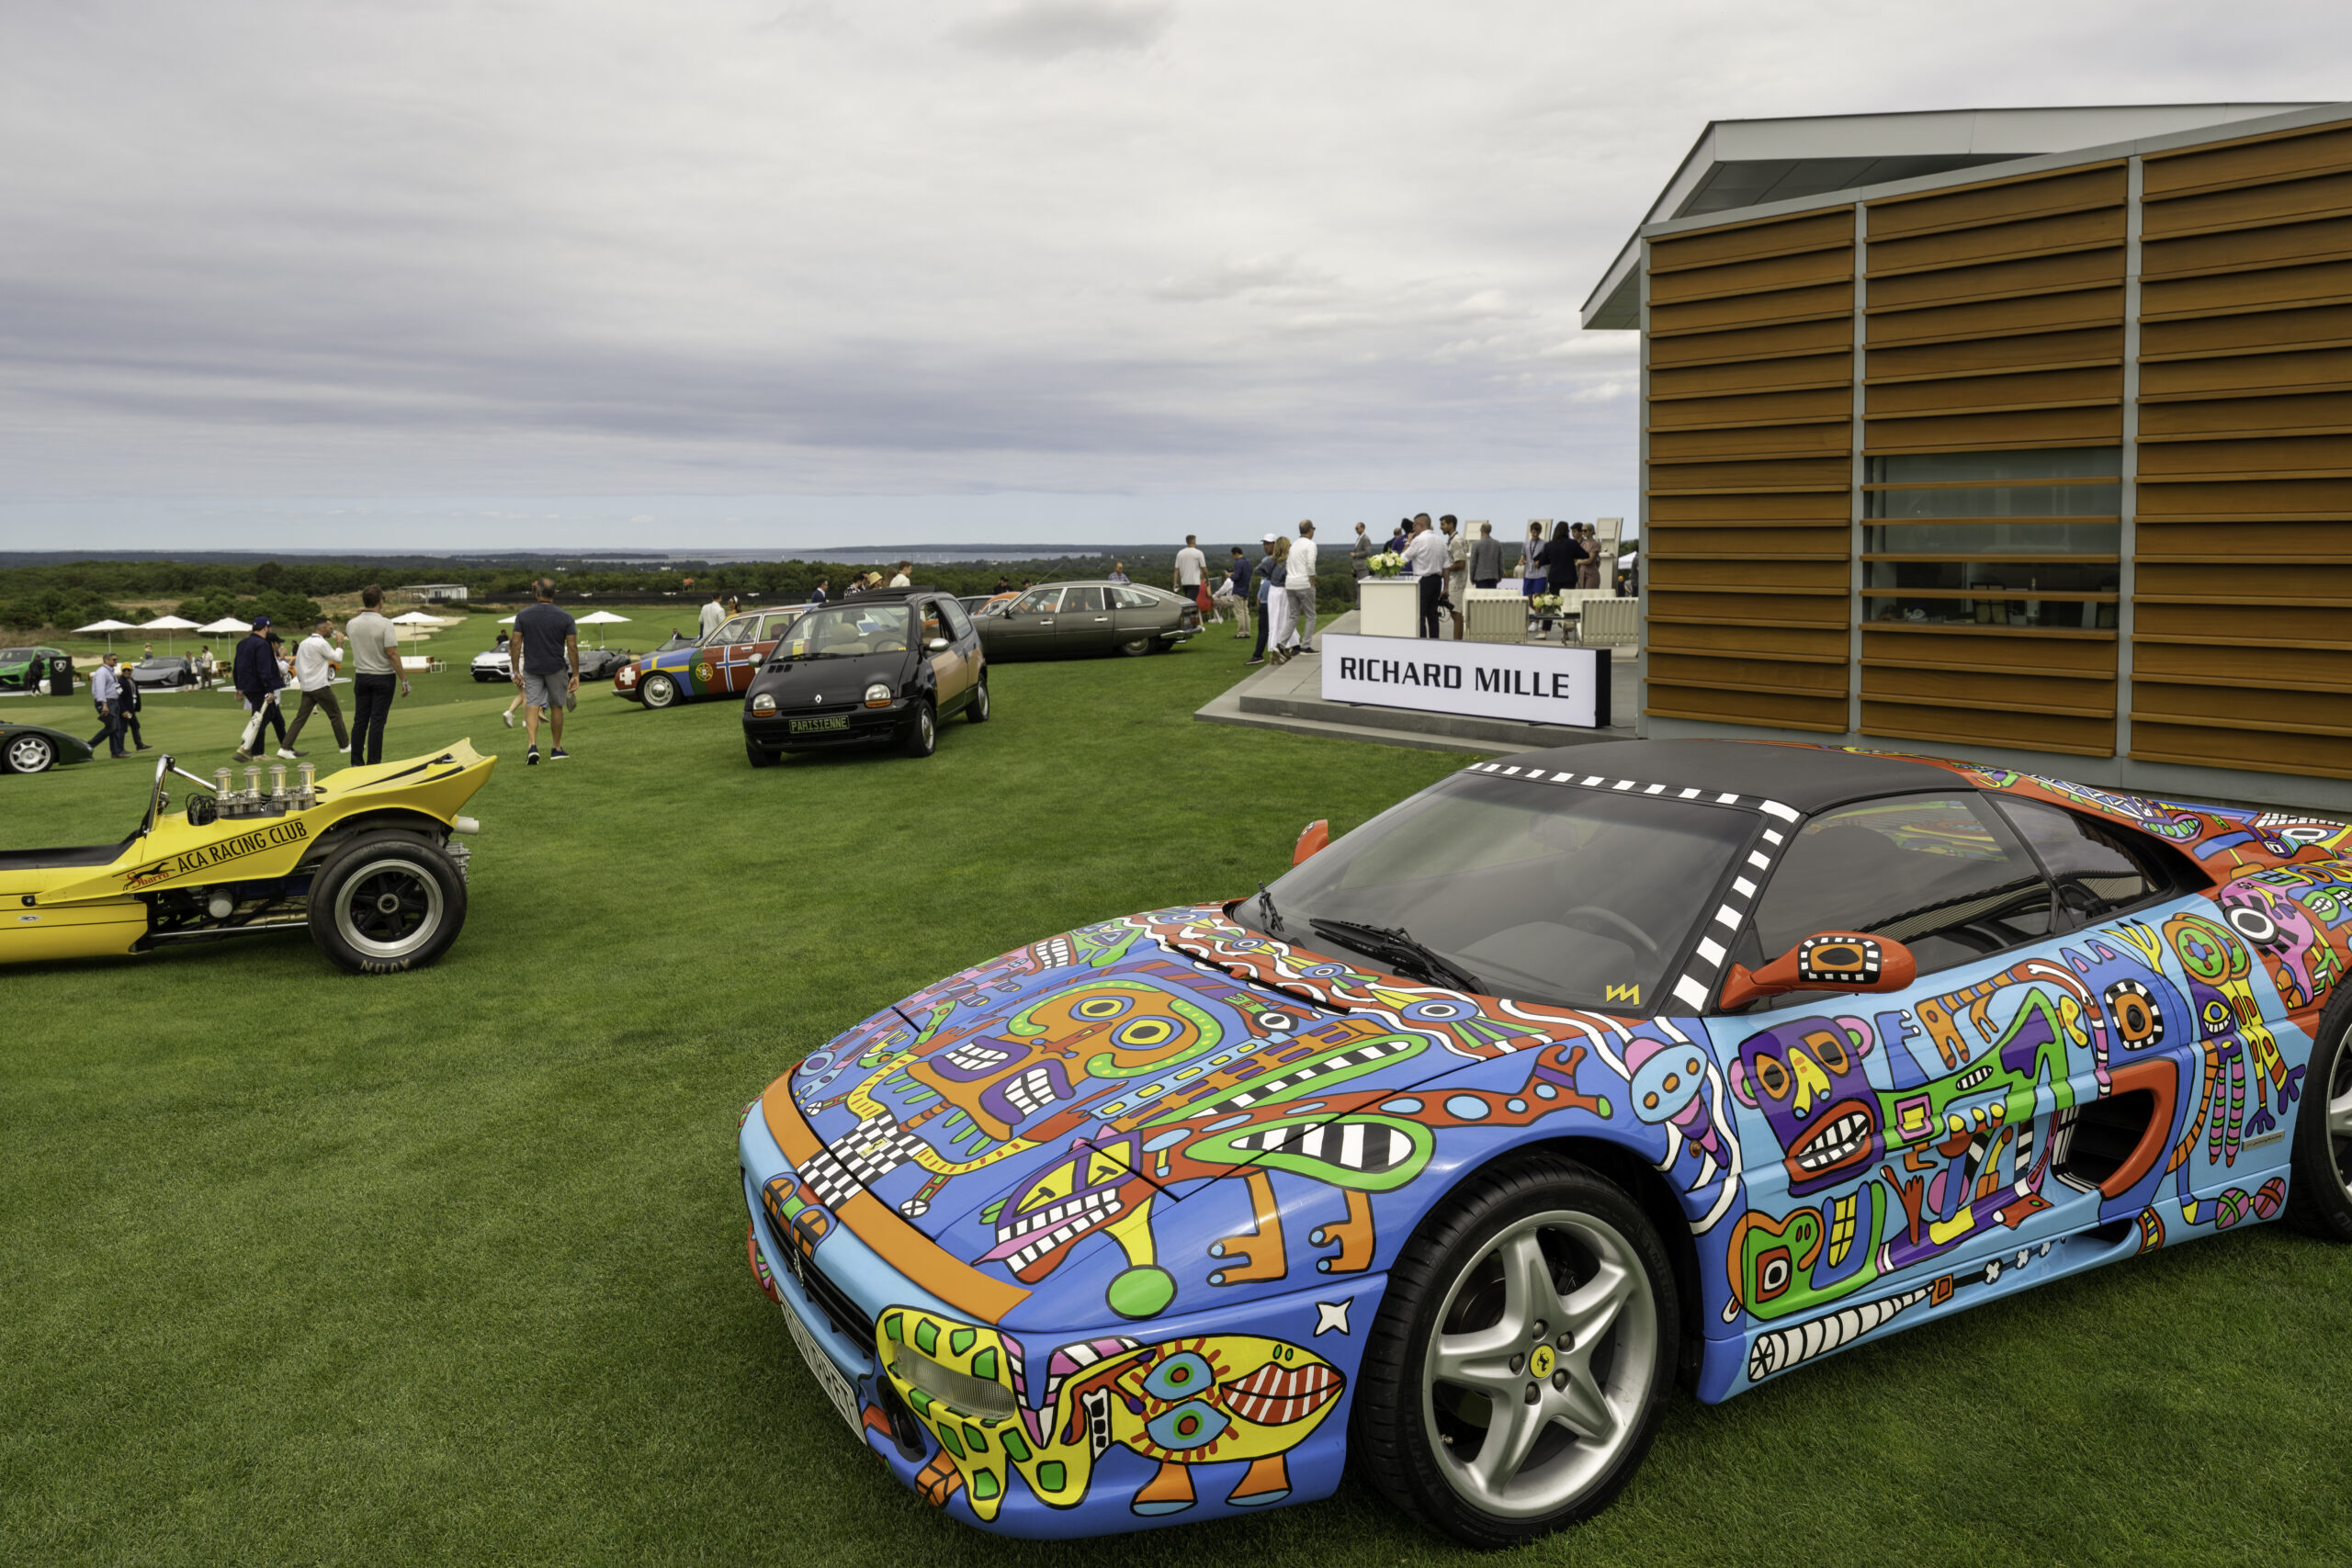 The Ferrari 355 Art Car by Ton Pret was included in the numerous selection of vehicles on Saturday.    RON ESPOSITO